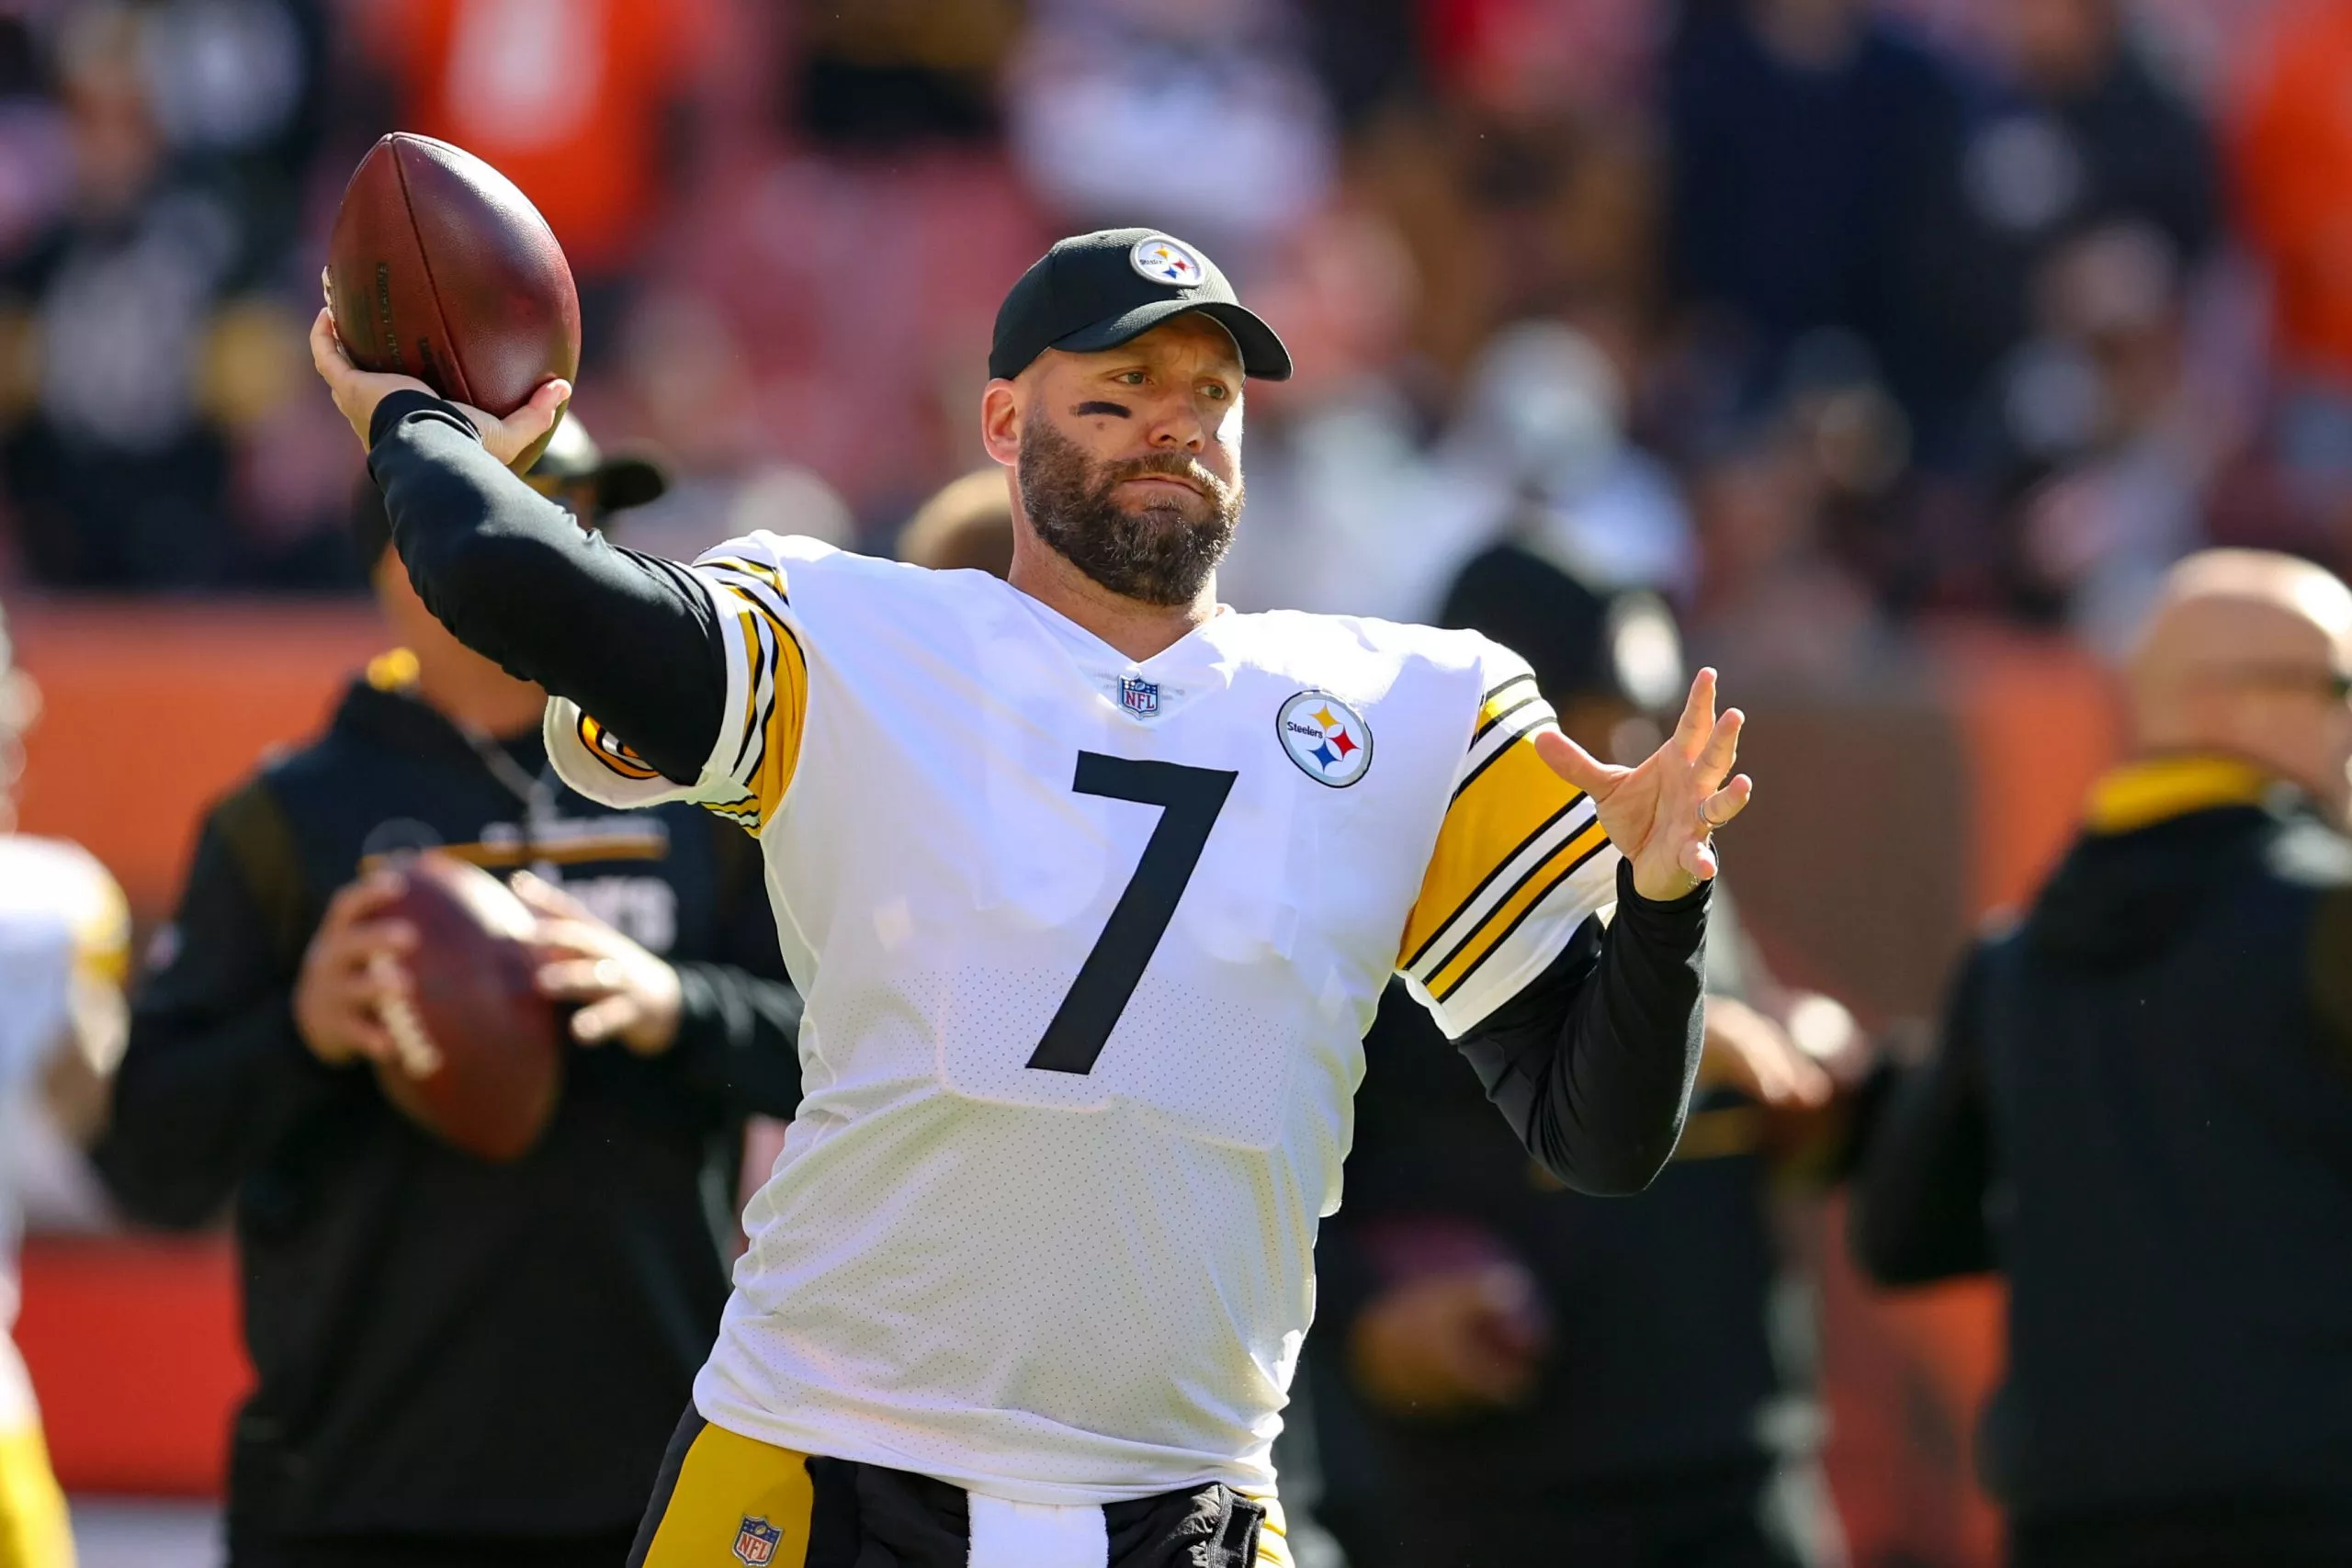 CLEVELAND, OH - OCTOBER 31: Pittsburgh Steelers quarterback Ben Roethlisberger (7) warms up prior to the National Footba